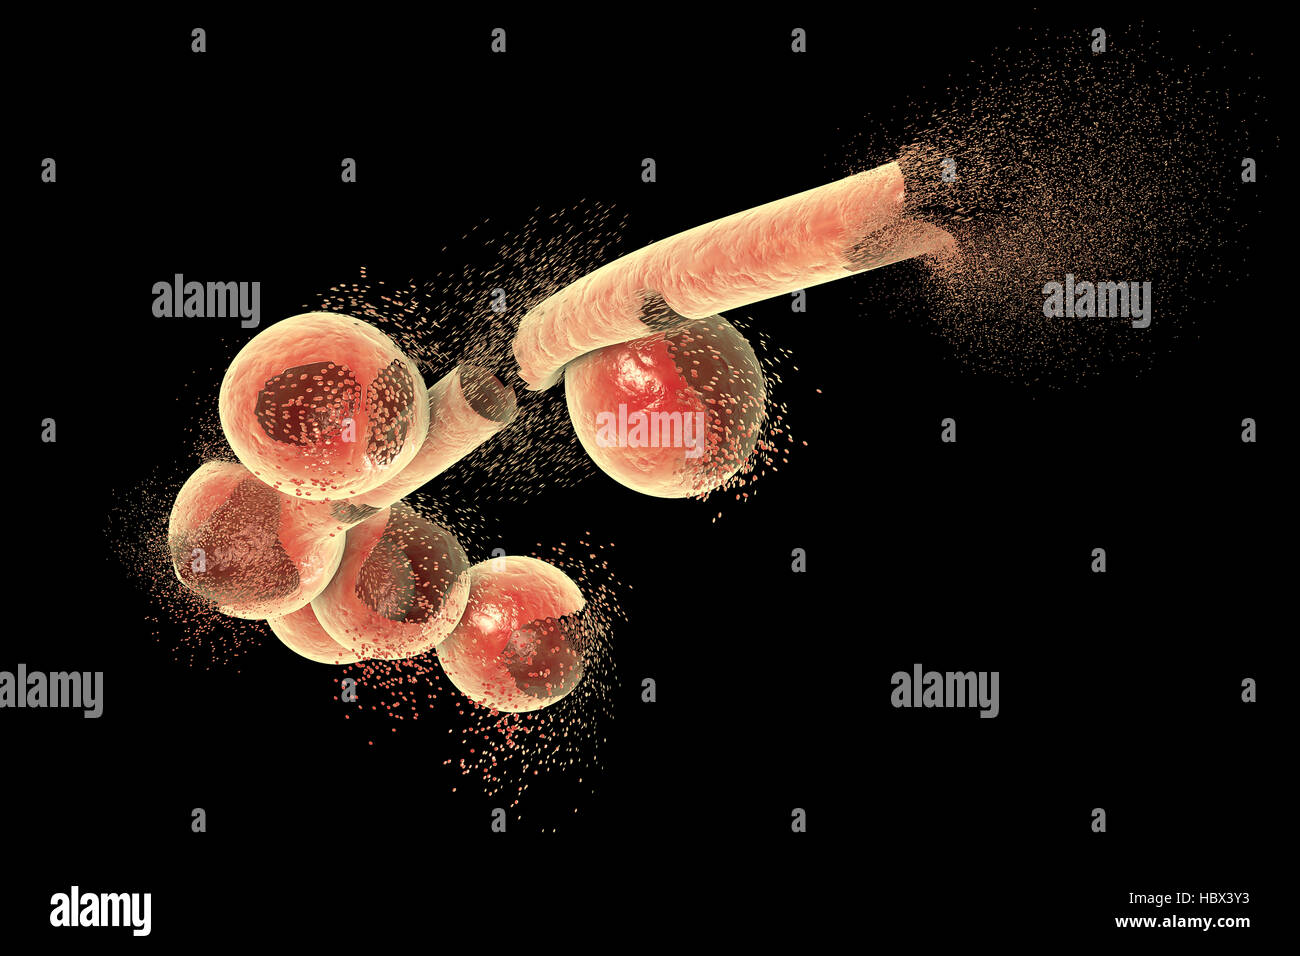 Destruction of Candida fungi, computer illustration. Image can be used to illustrate antifungal treatment concept. Stock Photo